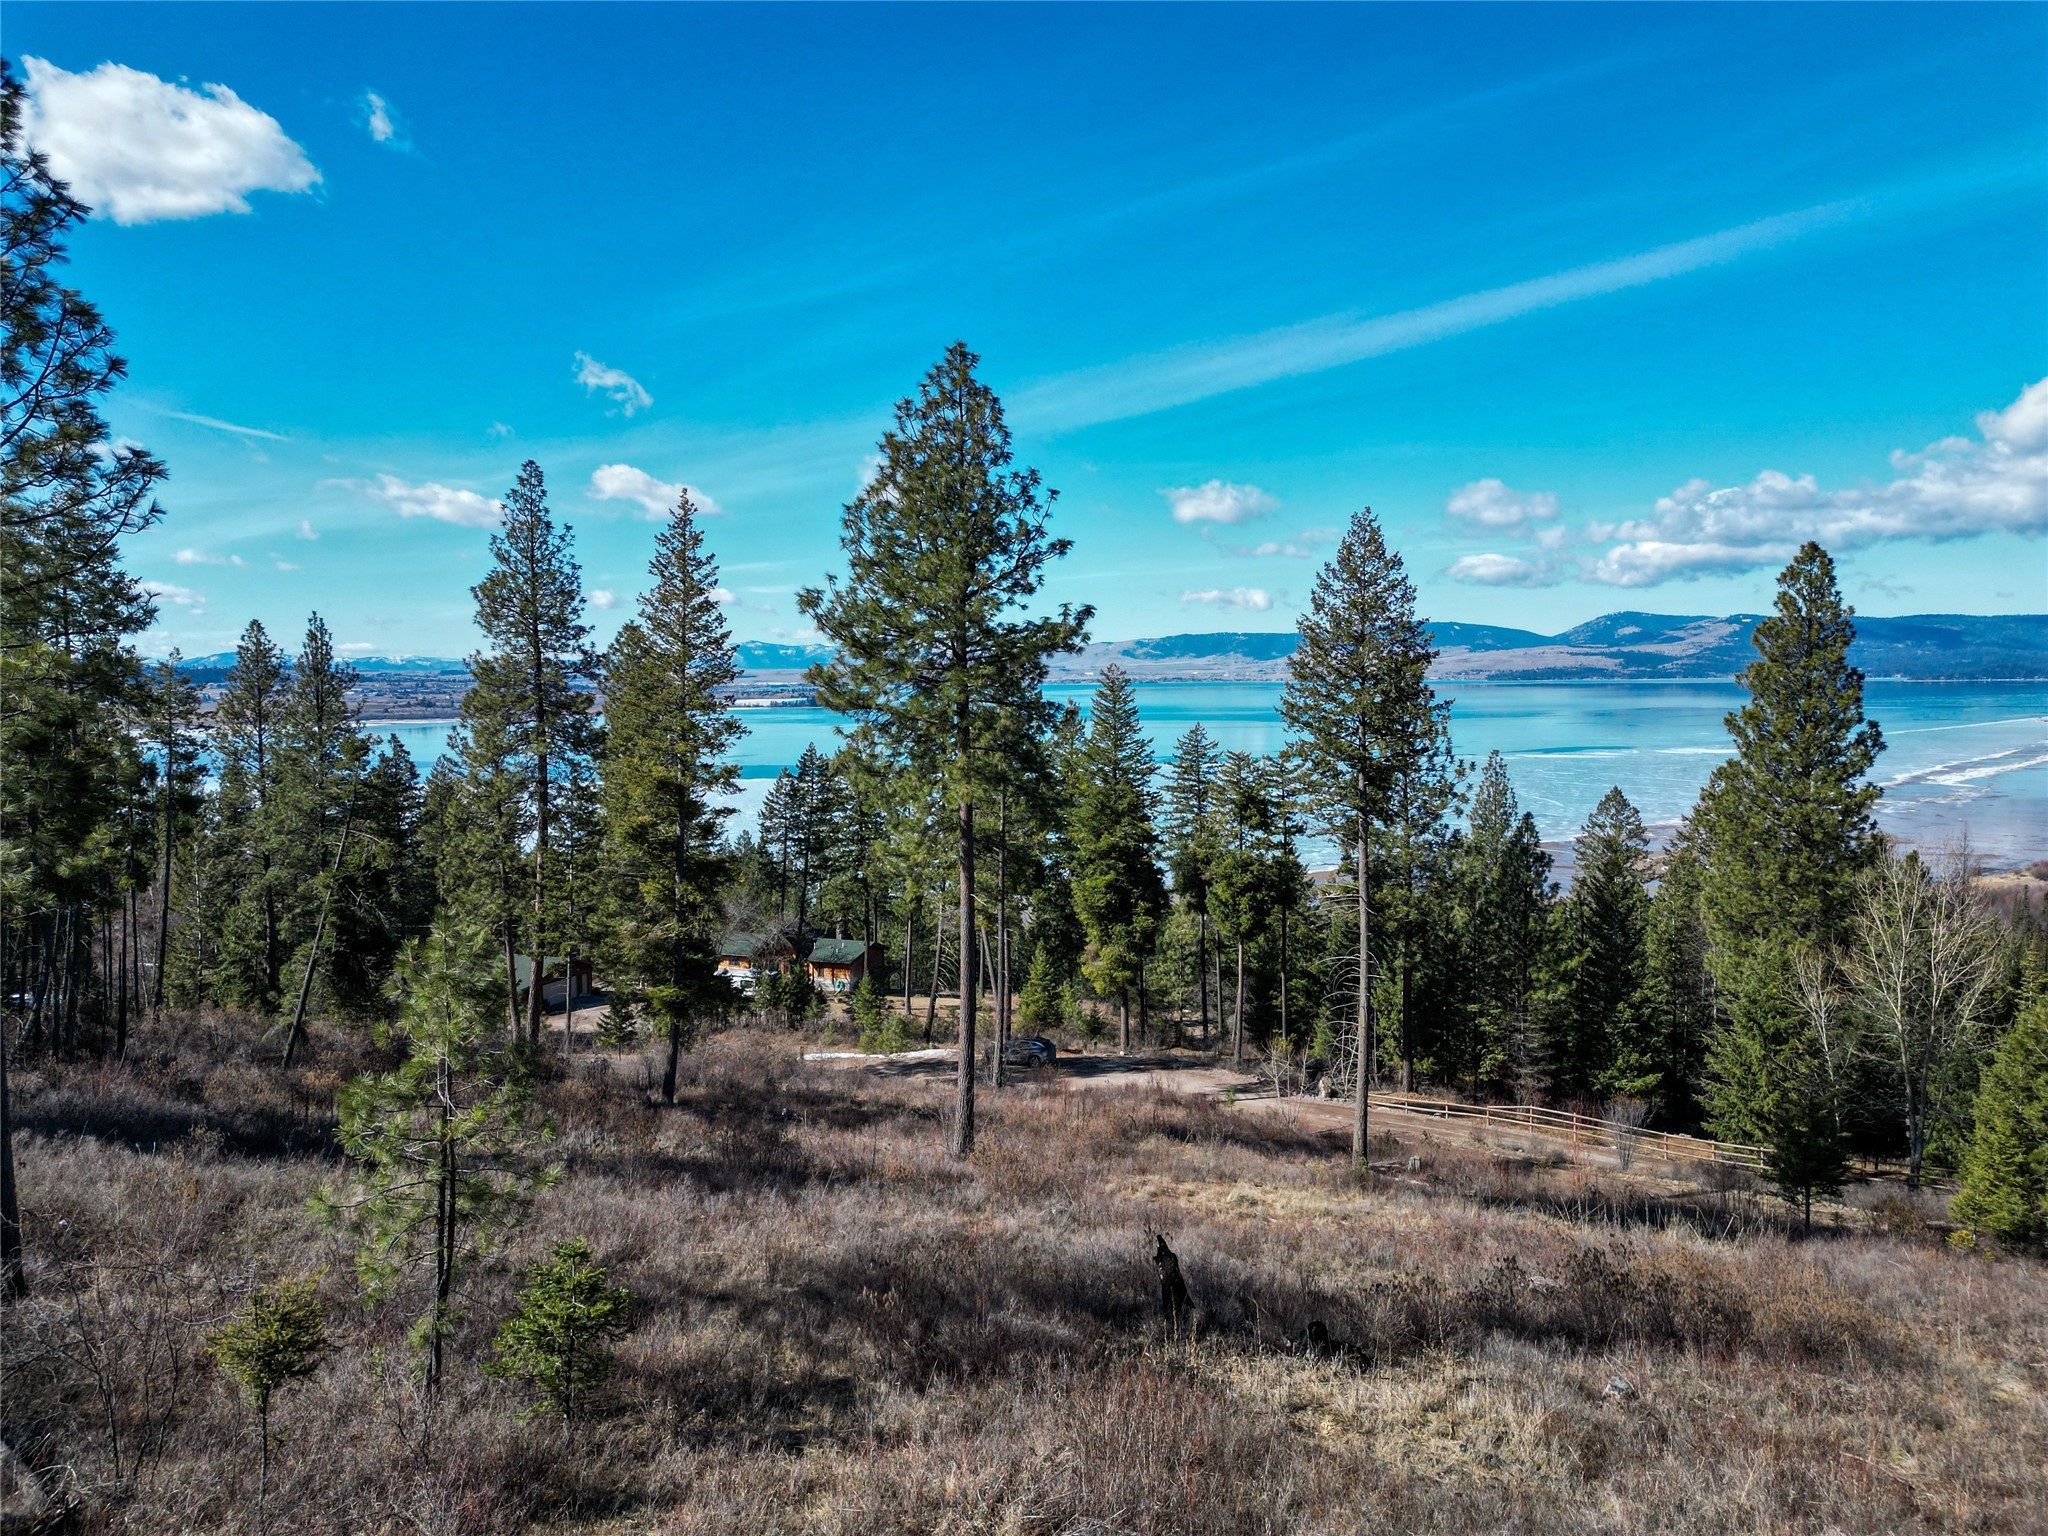 Introducing an amazing opportunity to own 5.1 acres of untouched beauty nestled along East Bay Lane in Polson, Montana. This parcel boasts panoramic vistas of the majestic Flathead Lake, with sweeping views overlooking Polson Bay. Situated minutes from Finley Point State Park which features a boat launch and offers a plethora of activities including boating, fishing, hiking, and picnicking, ensuring endless adventures for all ages. Despite its close proximity to Polson, a charming lakeside town offering modern conveniences and amenities, this property exudes a serene and secluded ambiance, providing the perfect retreat from the hustle and bustle of life. The land features several level areas, with diverse landscape, which includes multiple cleared and wooded areas ideal for constructing your dream home or vacation retreat. Electric infrastructure conveniently located next to the property line and corner pins have been marked, ensuring clarity regarding the property boundaries. Whether you envision building a year-round residence, a vacation getaway, or an investment property, this parcel presents limitless potential. Don't miss out on the chance to make your dreams a reality amidst the unparalleled beauty of Polson, Montana. Opportunity awaits! Contact Holly Naldrett at 406-407-2355 or your real estate professional.